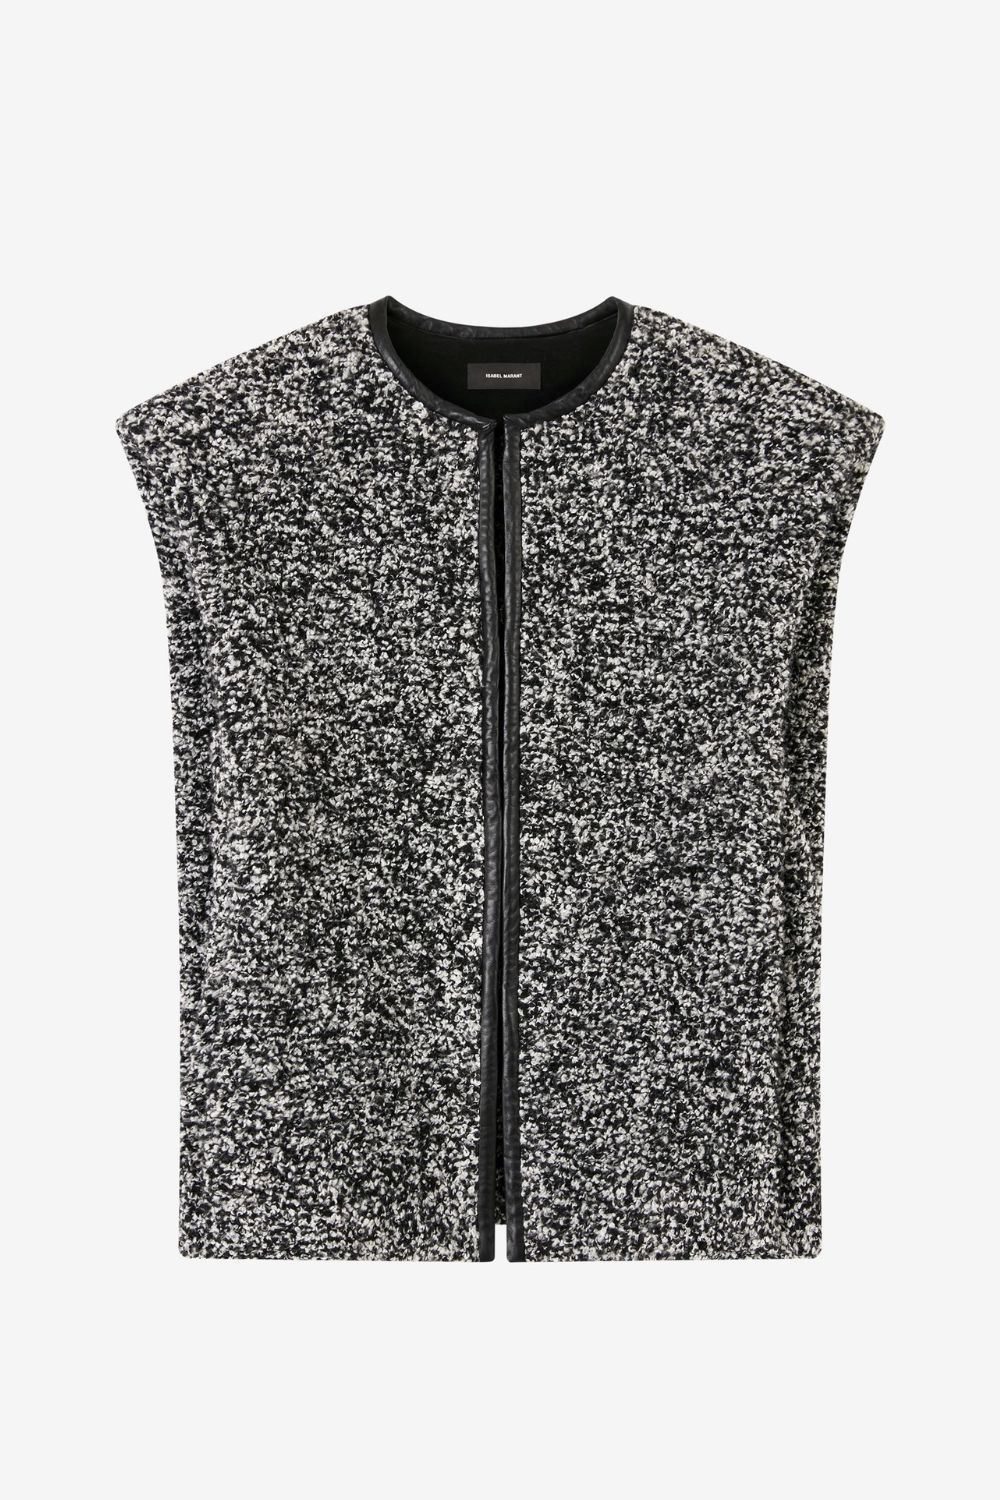 The-Gloss-Magazine-best-gilets-to-shop-now-10